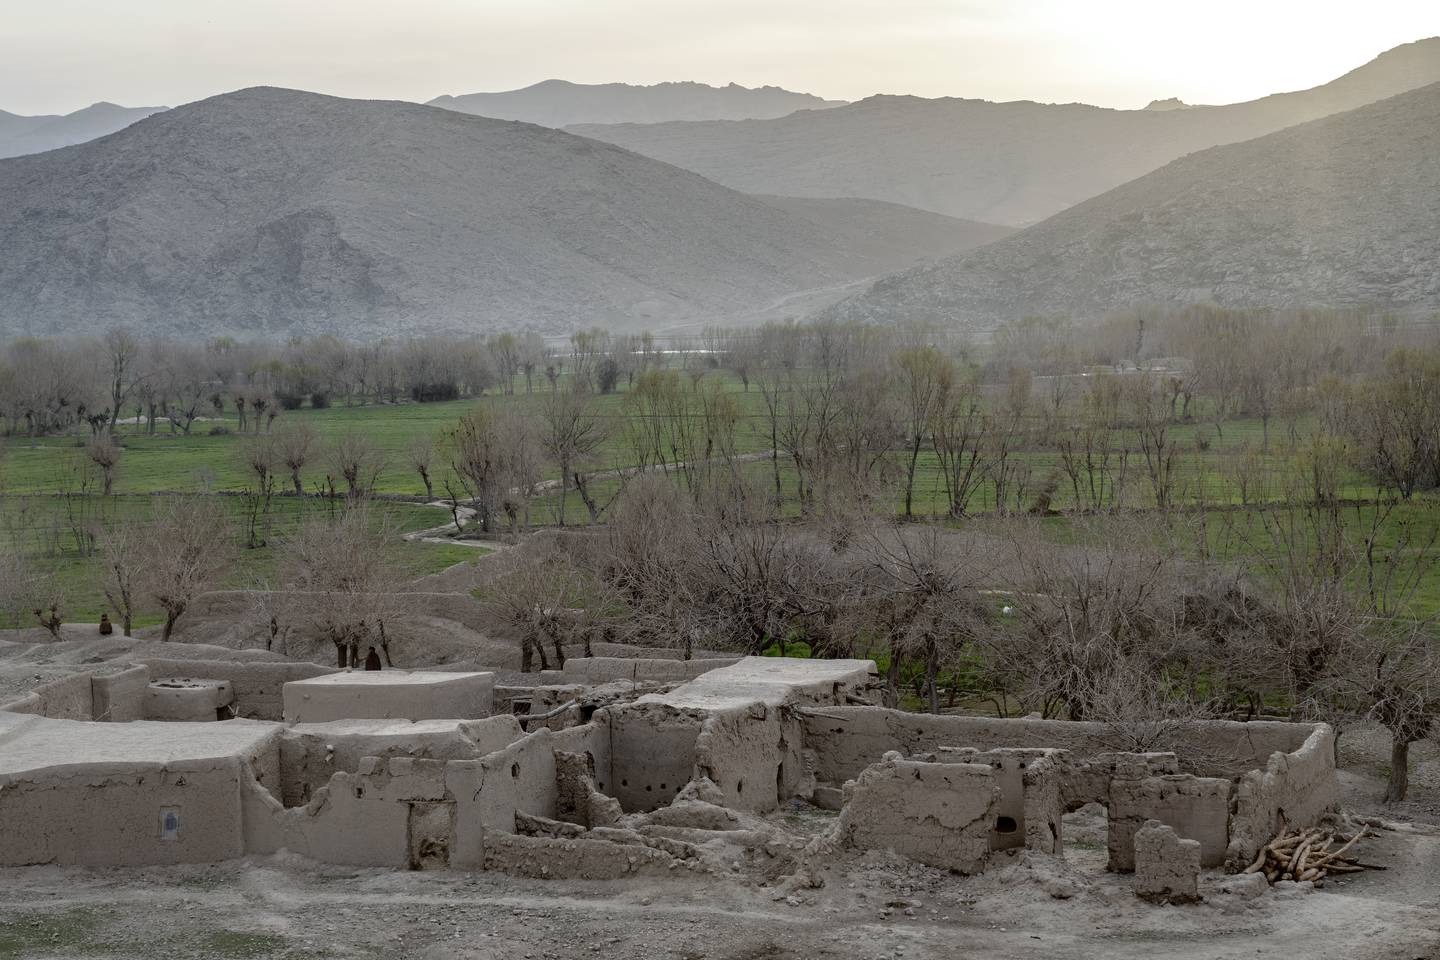 The remains of a home destroyed by U.S. forces during a Sept. 5, 2019, night raid is seen in a village in a remote region of Afghanistan, on Saturday, Feb. 25, 2023.